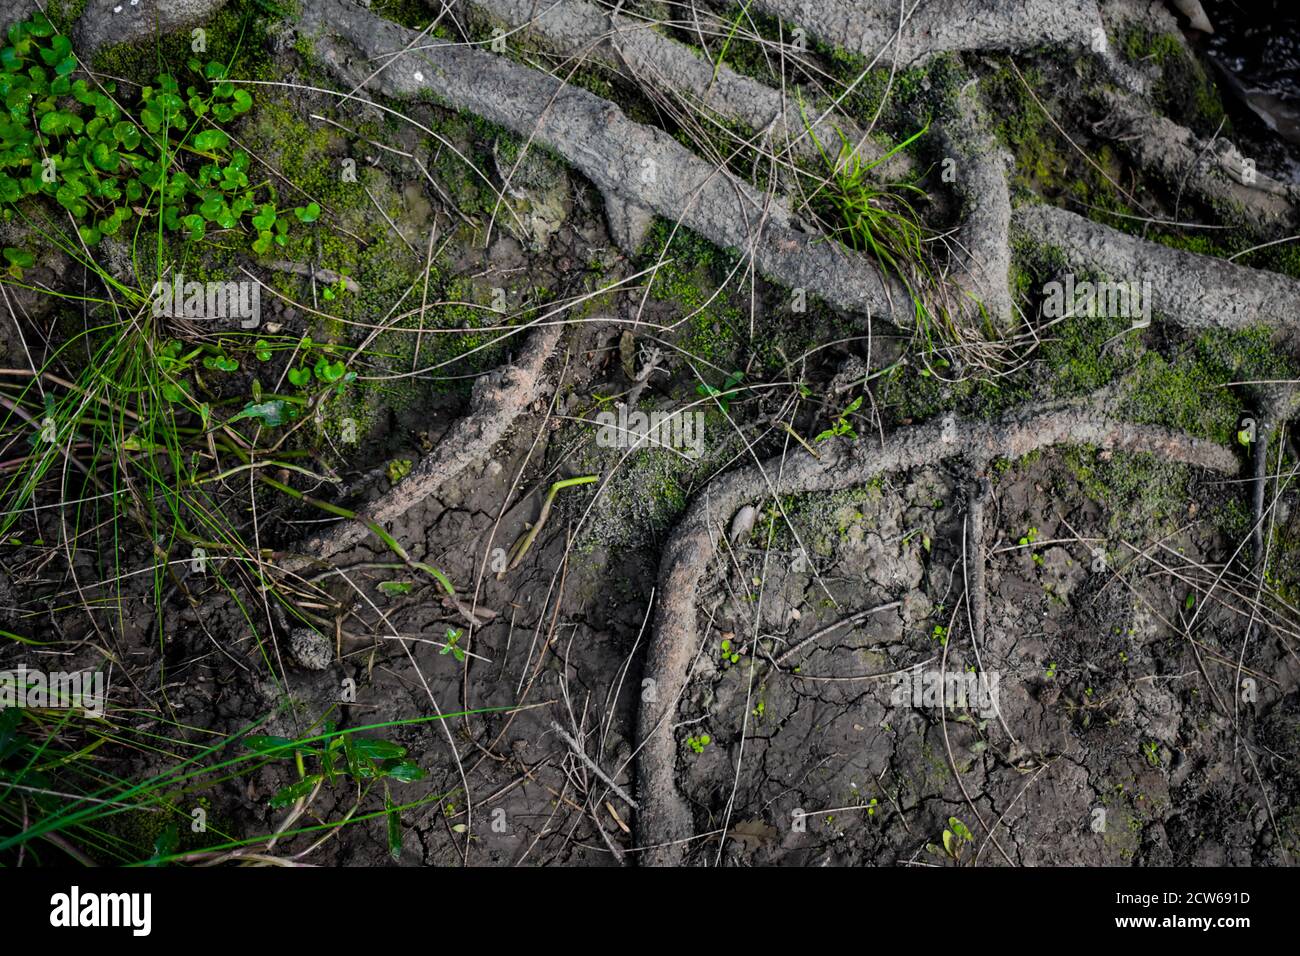 Tree roots surrounded by some shrubbery and moss with some tree needles covering the floor. The mud is also cracked. Stock Photo